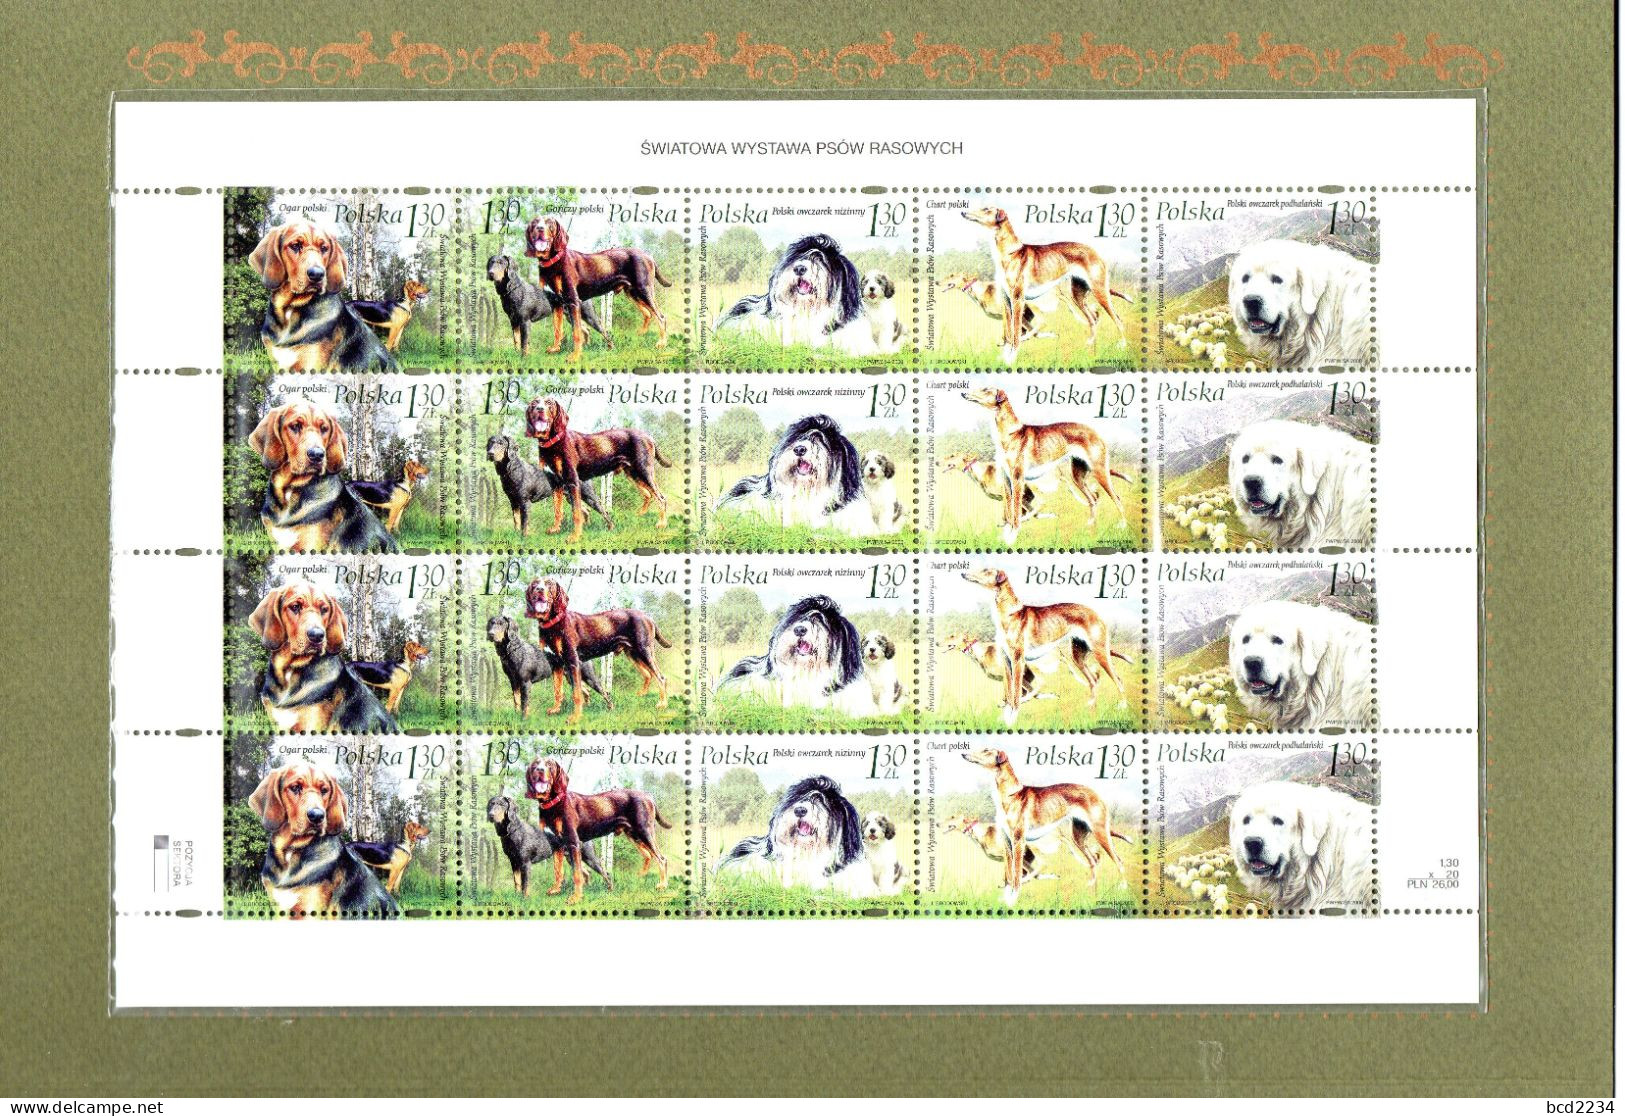 POLAND 2006 RARE POLISH POST OFFICE LIMITED EDITION FOLDER: SHEET OF 20 STAMPS OF WORLD EXHIBITION SHOW PEDIGREE DOGS - Cartas & Documentos